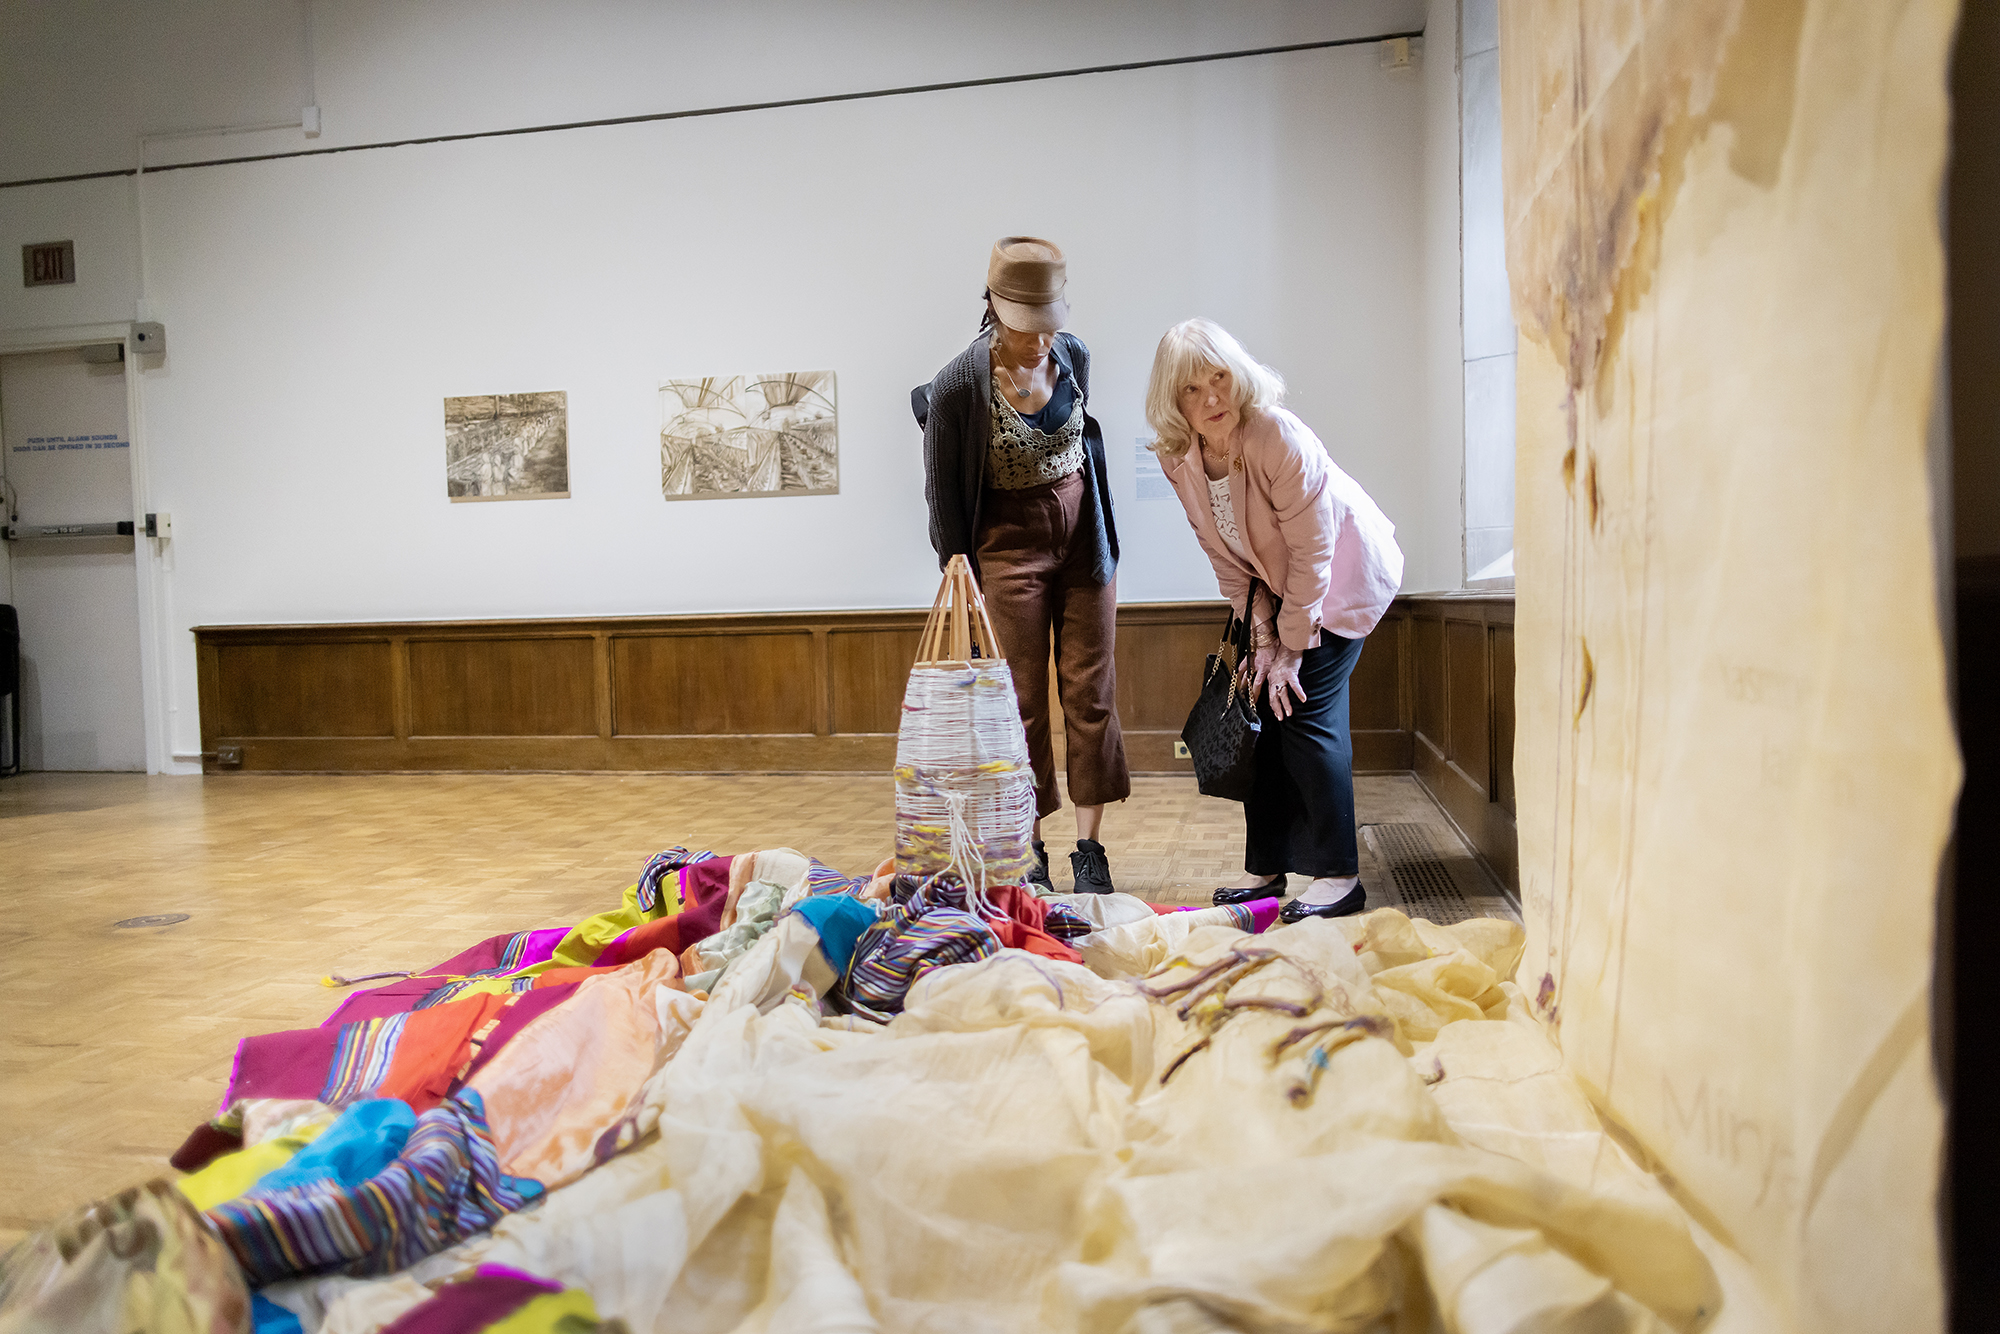 two people looking at artwork featuring fabric piled on the floor